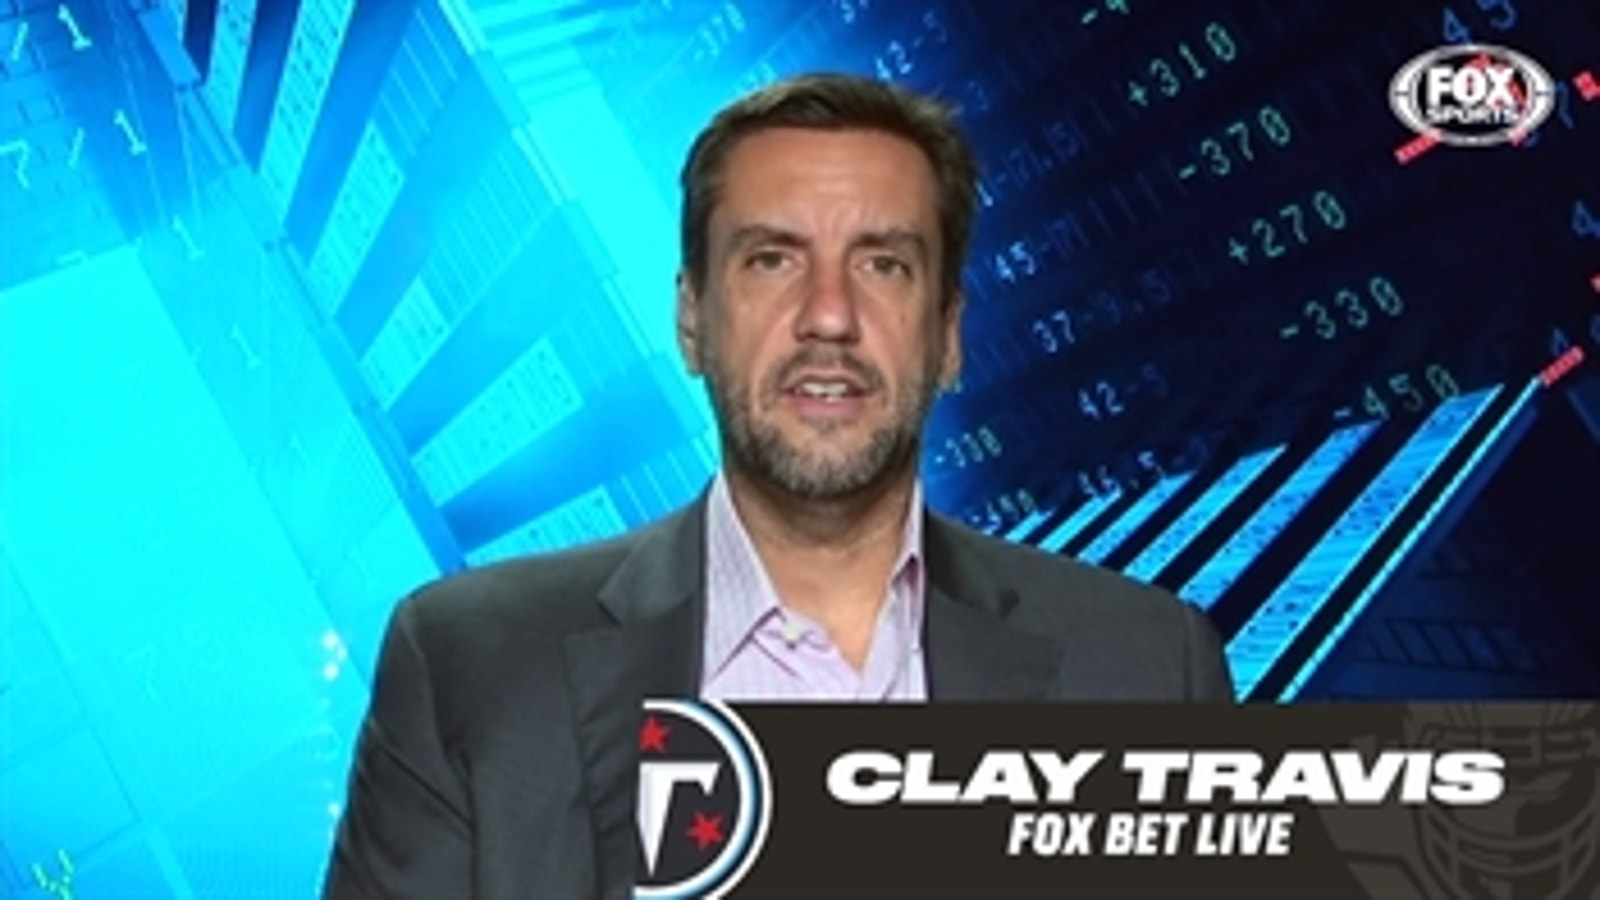 Clay Travis: ‘Few states love football like Tennessee’, Titans have best fans in NFL